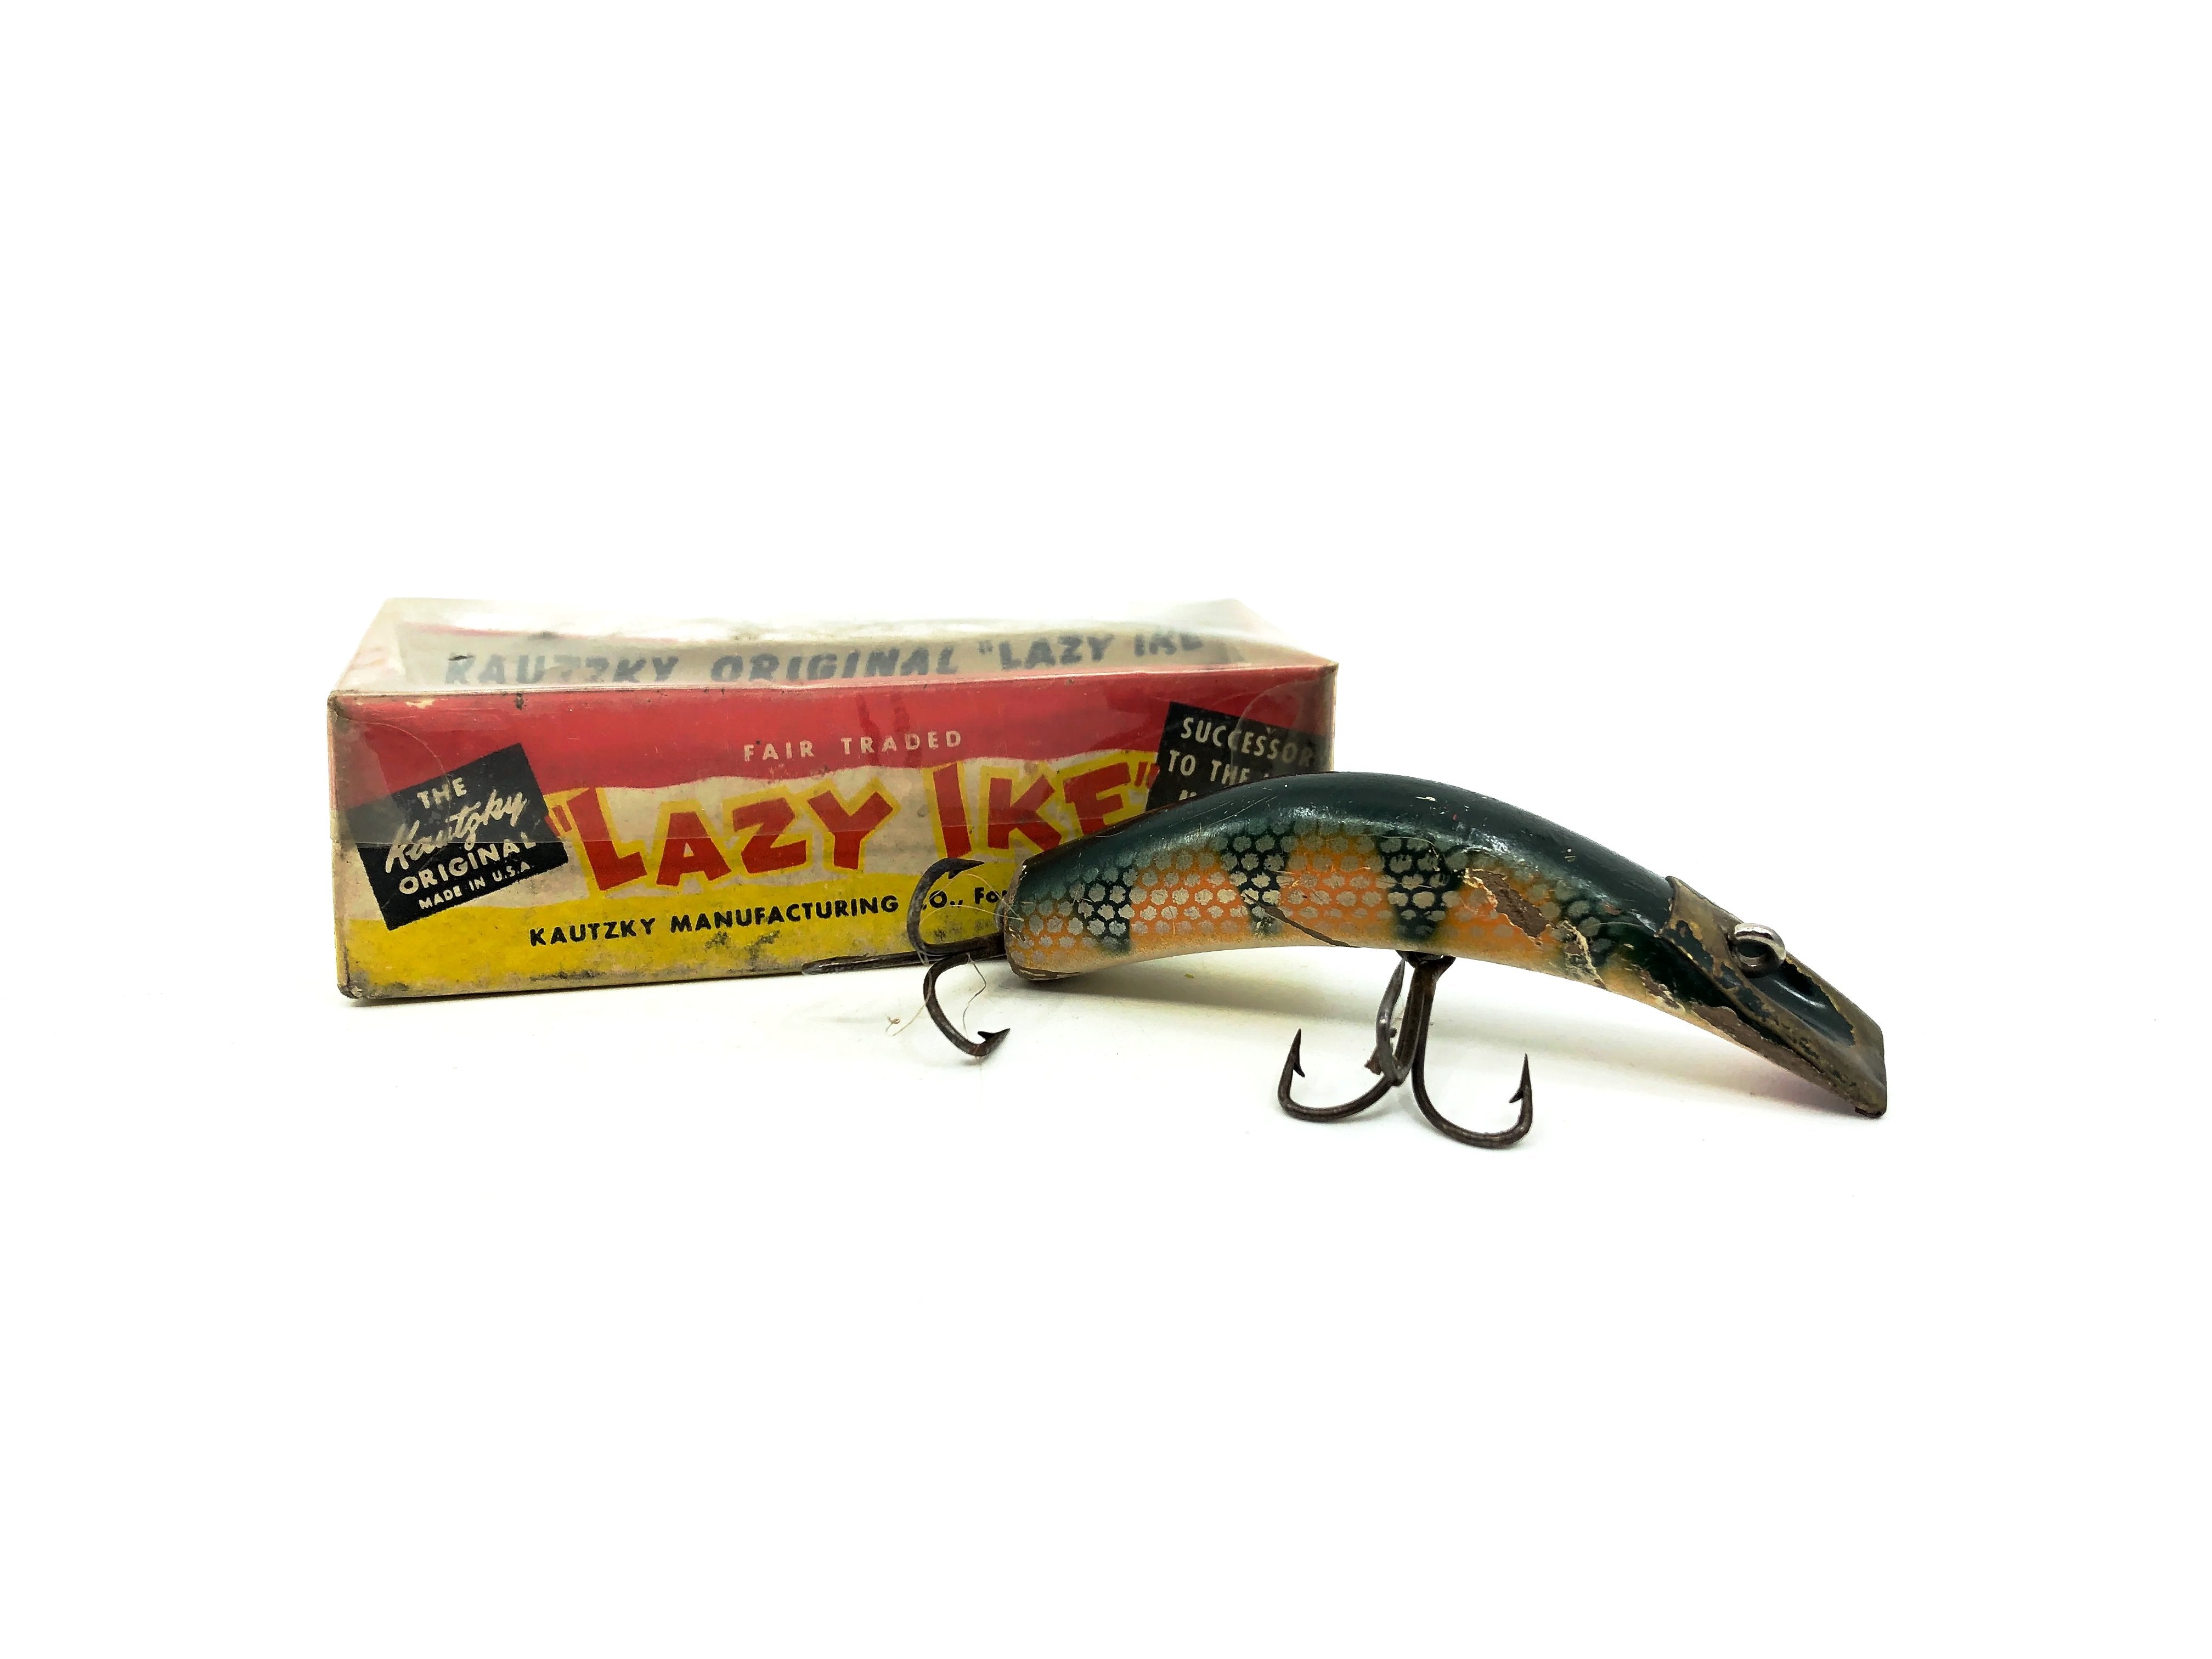 Kautzky Lazy Ike 3 KL-33 Wooden, Perch Color with Box